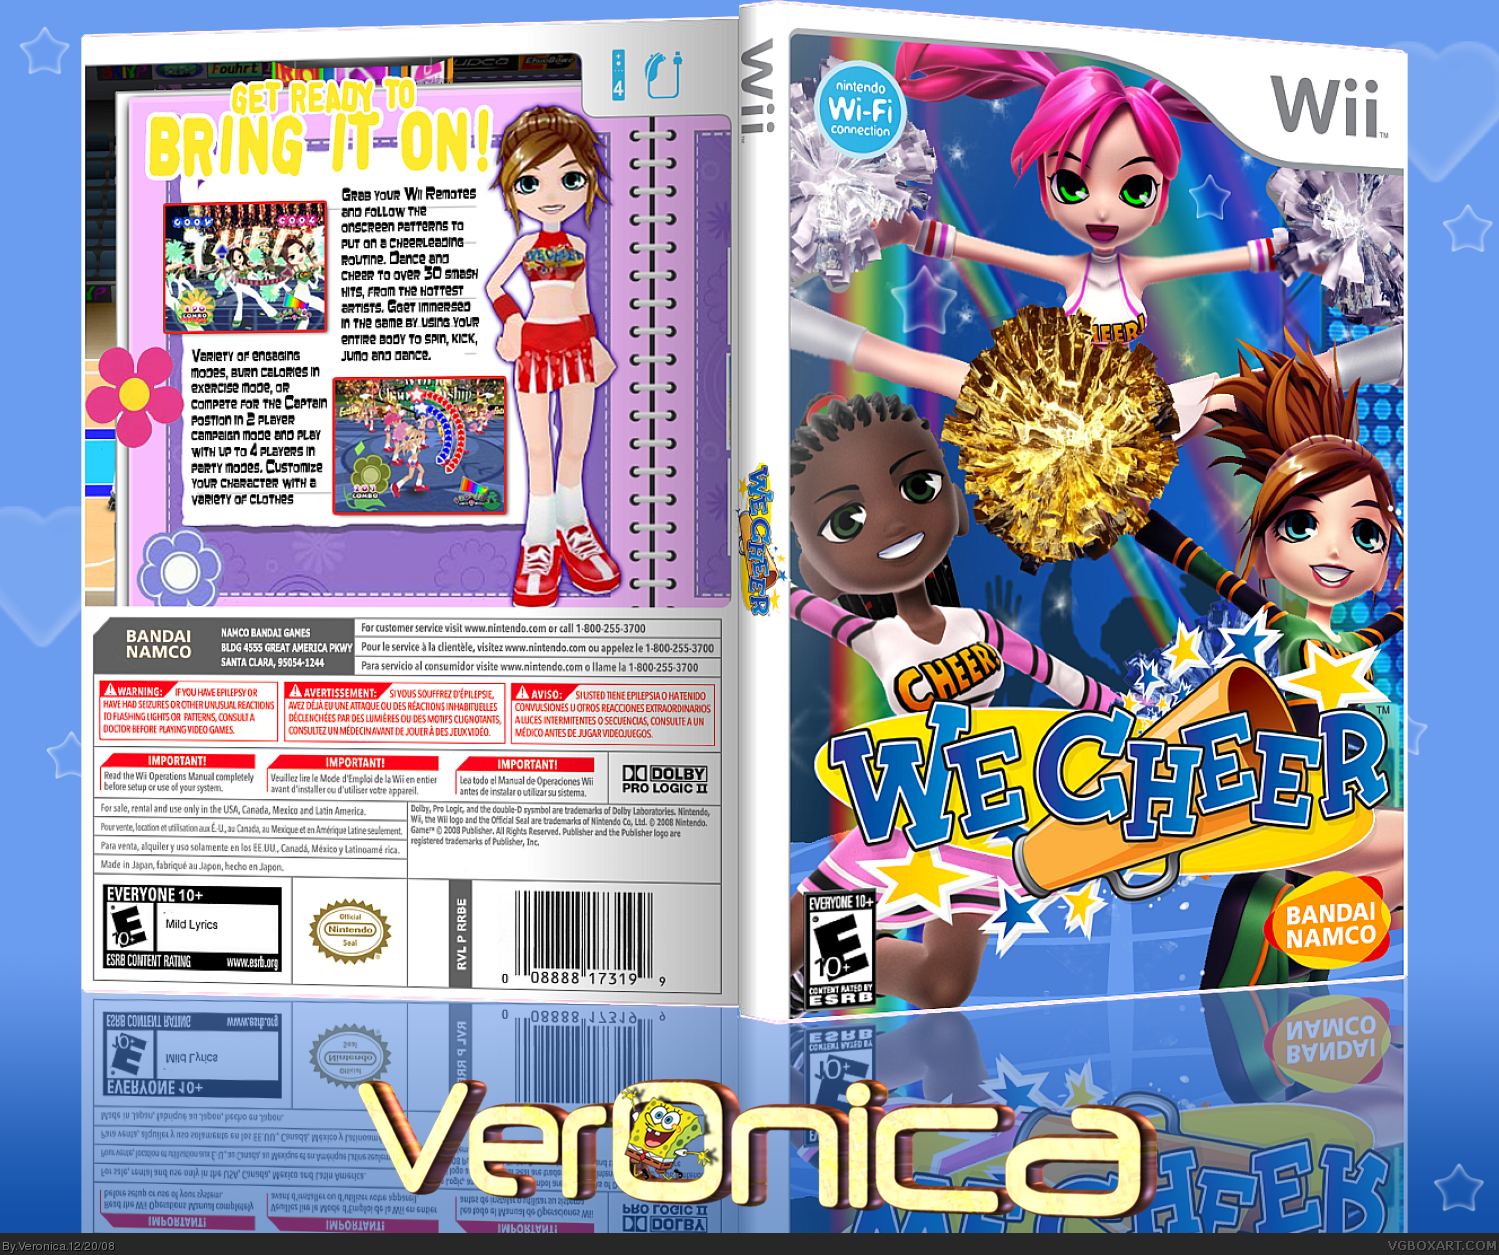 We Cheer box cover